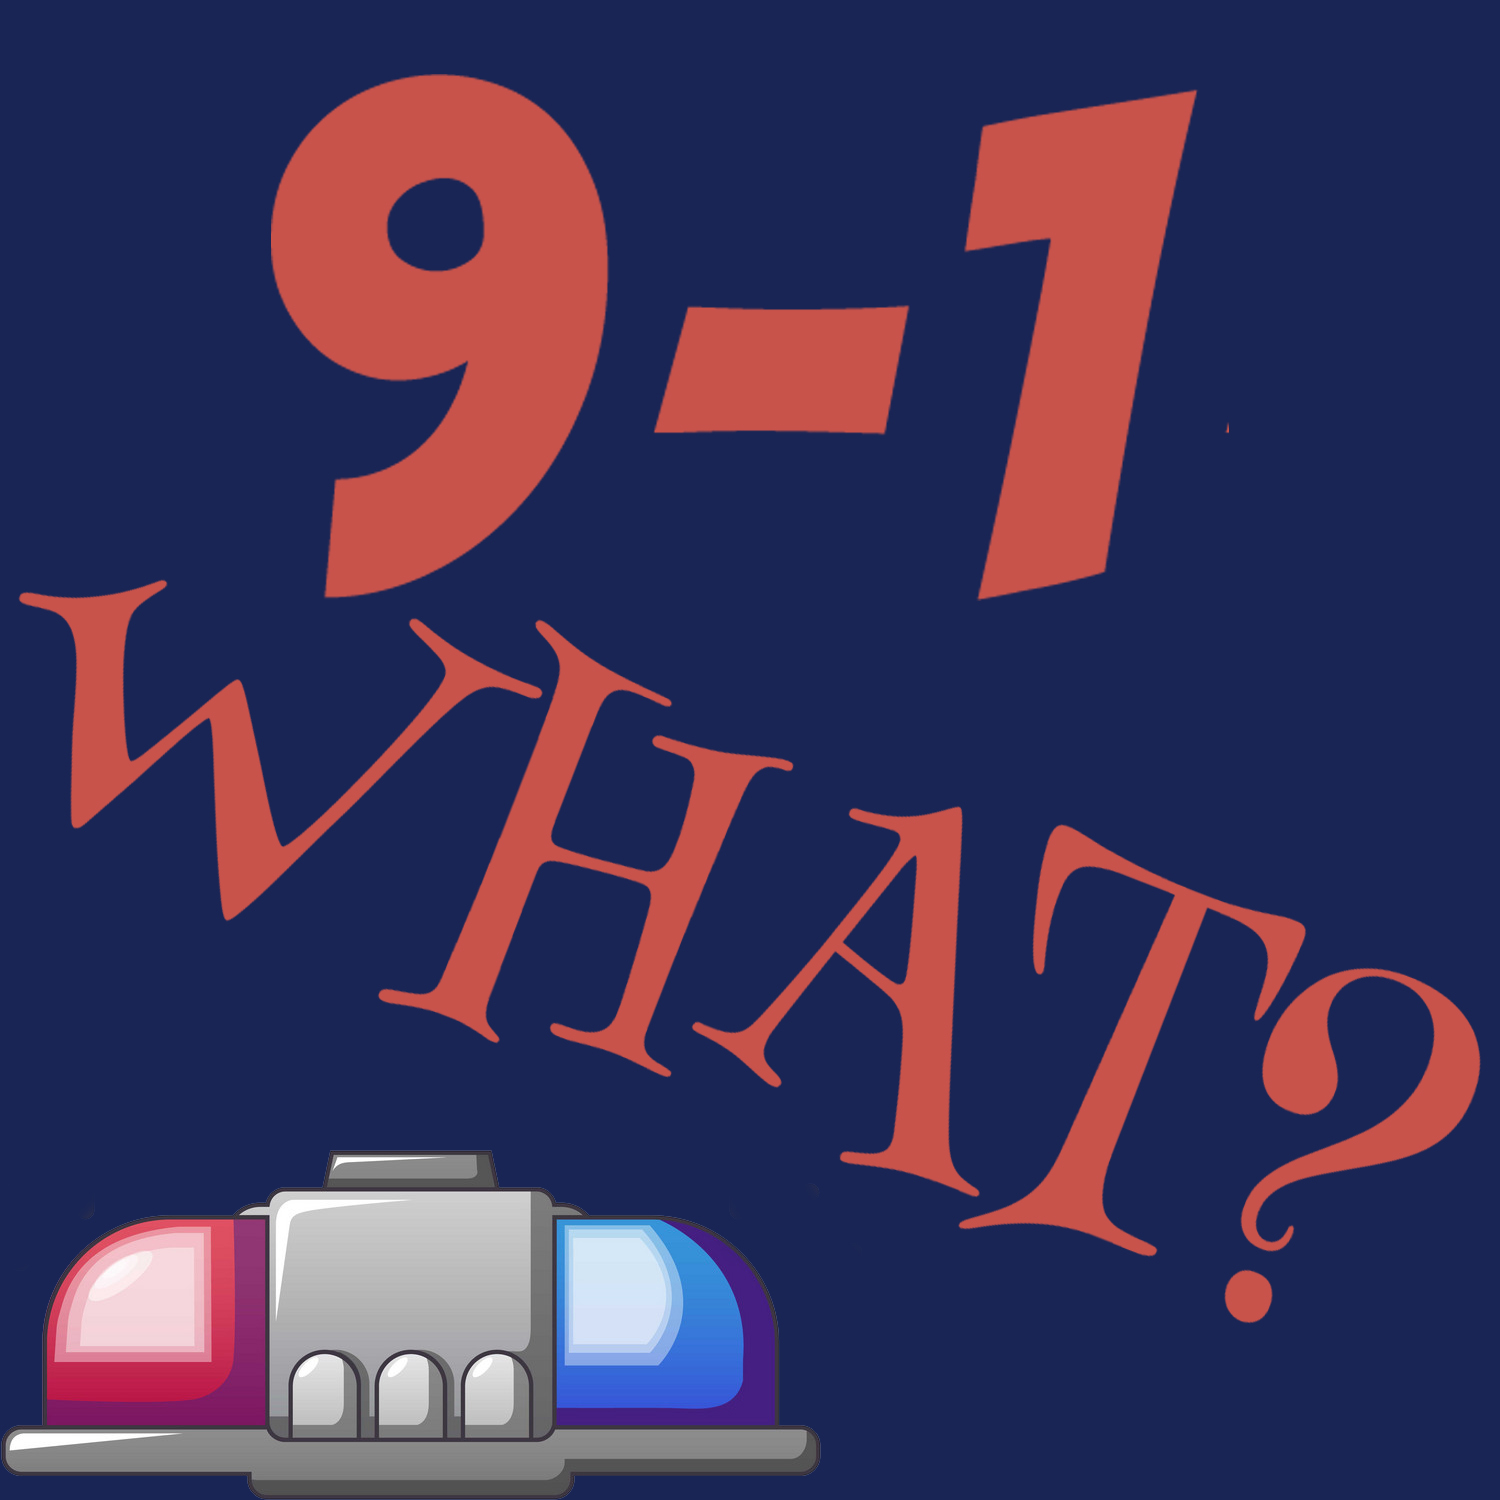 9-1-WHAT? Podcast (91WHAT)